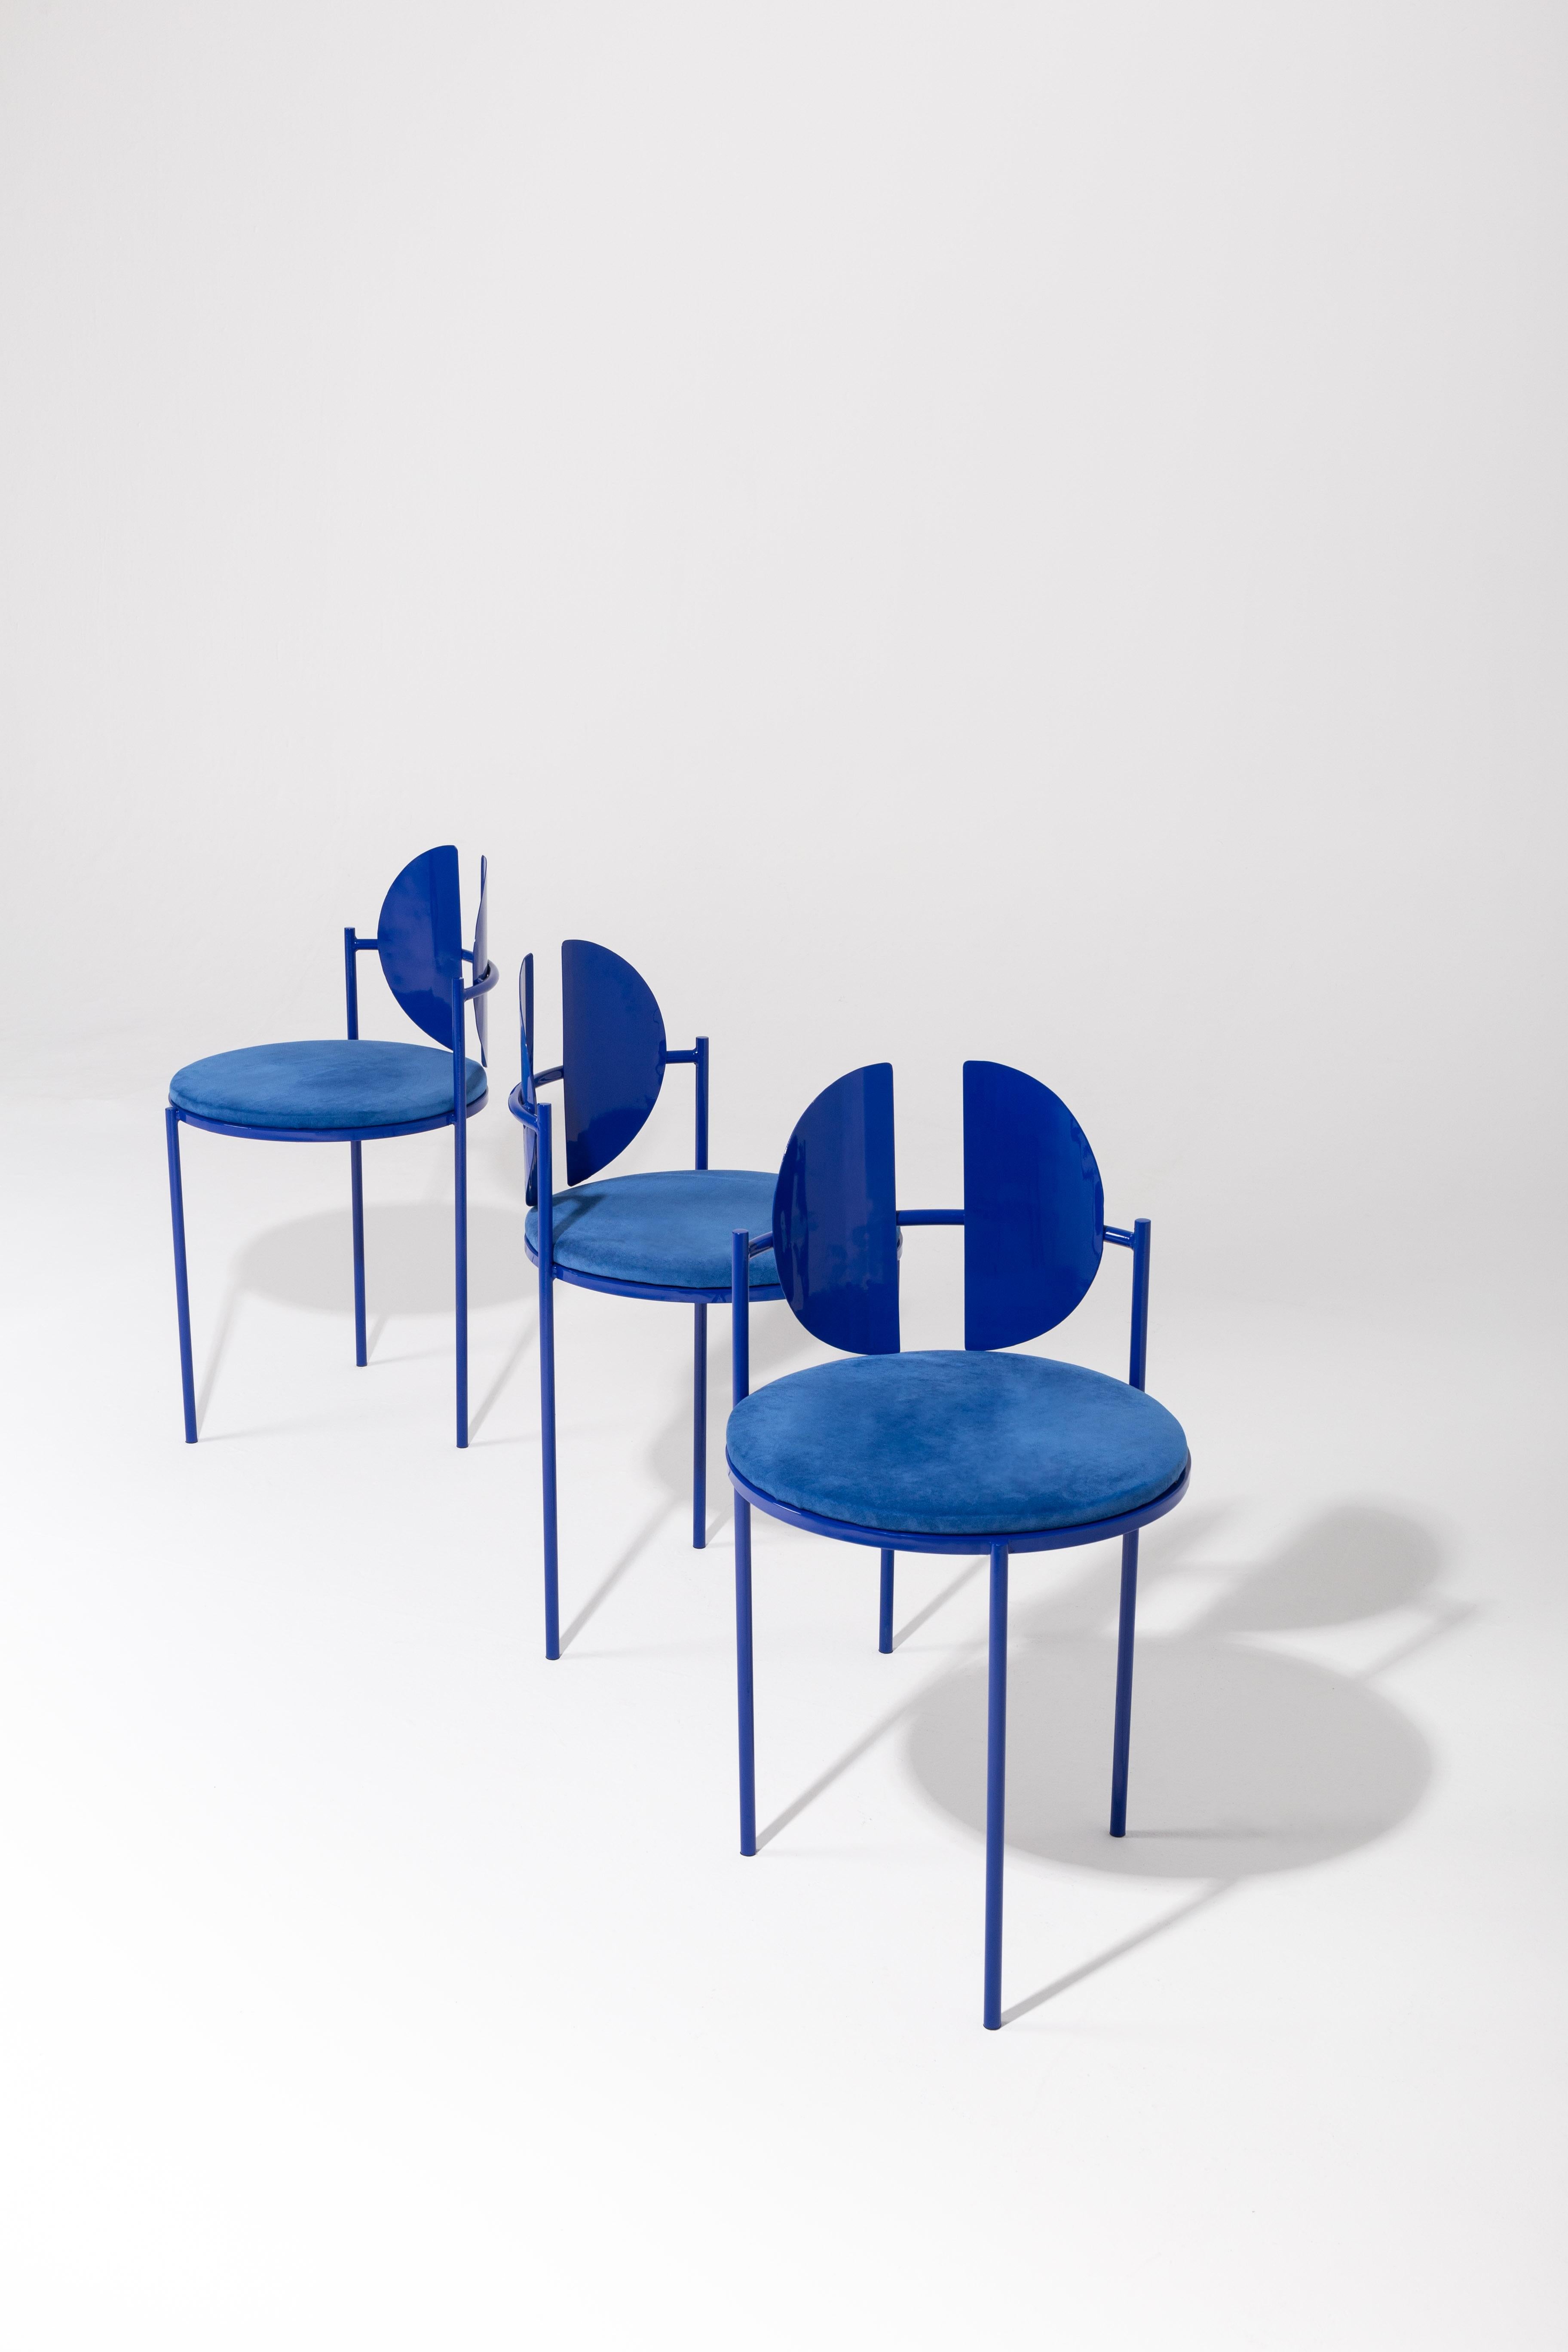 Sculptural Dining Table and Chairs Ensemble by Ángel Mombiedro 2